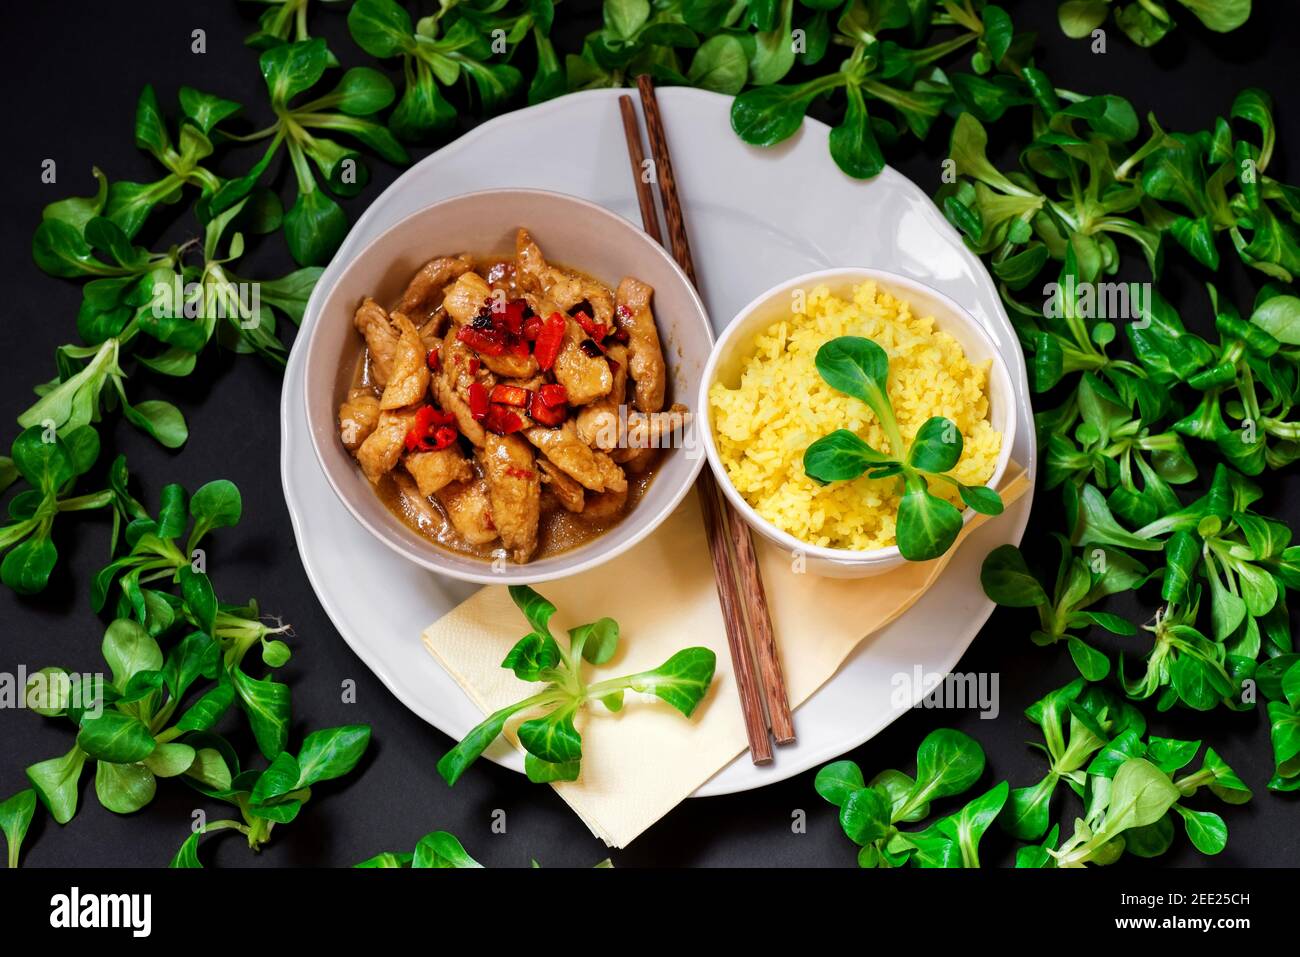 Turkey meat strips with red pepper, curry rice on white plate, chopstick and many lamb ´s lettuce leaf on black background. Asian food. Stock Photo